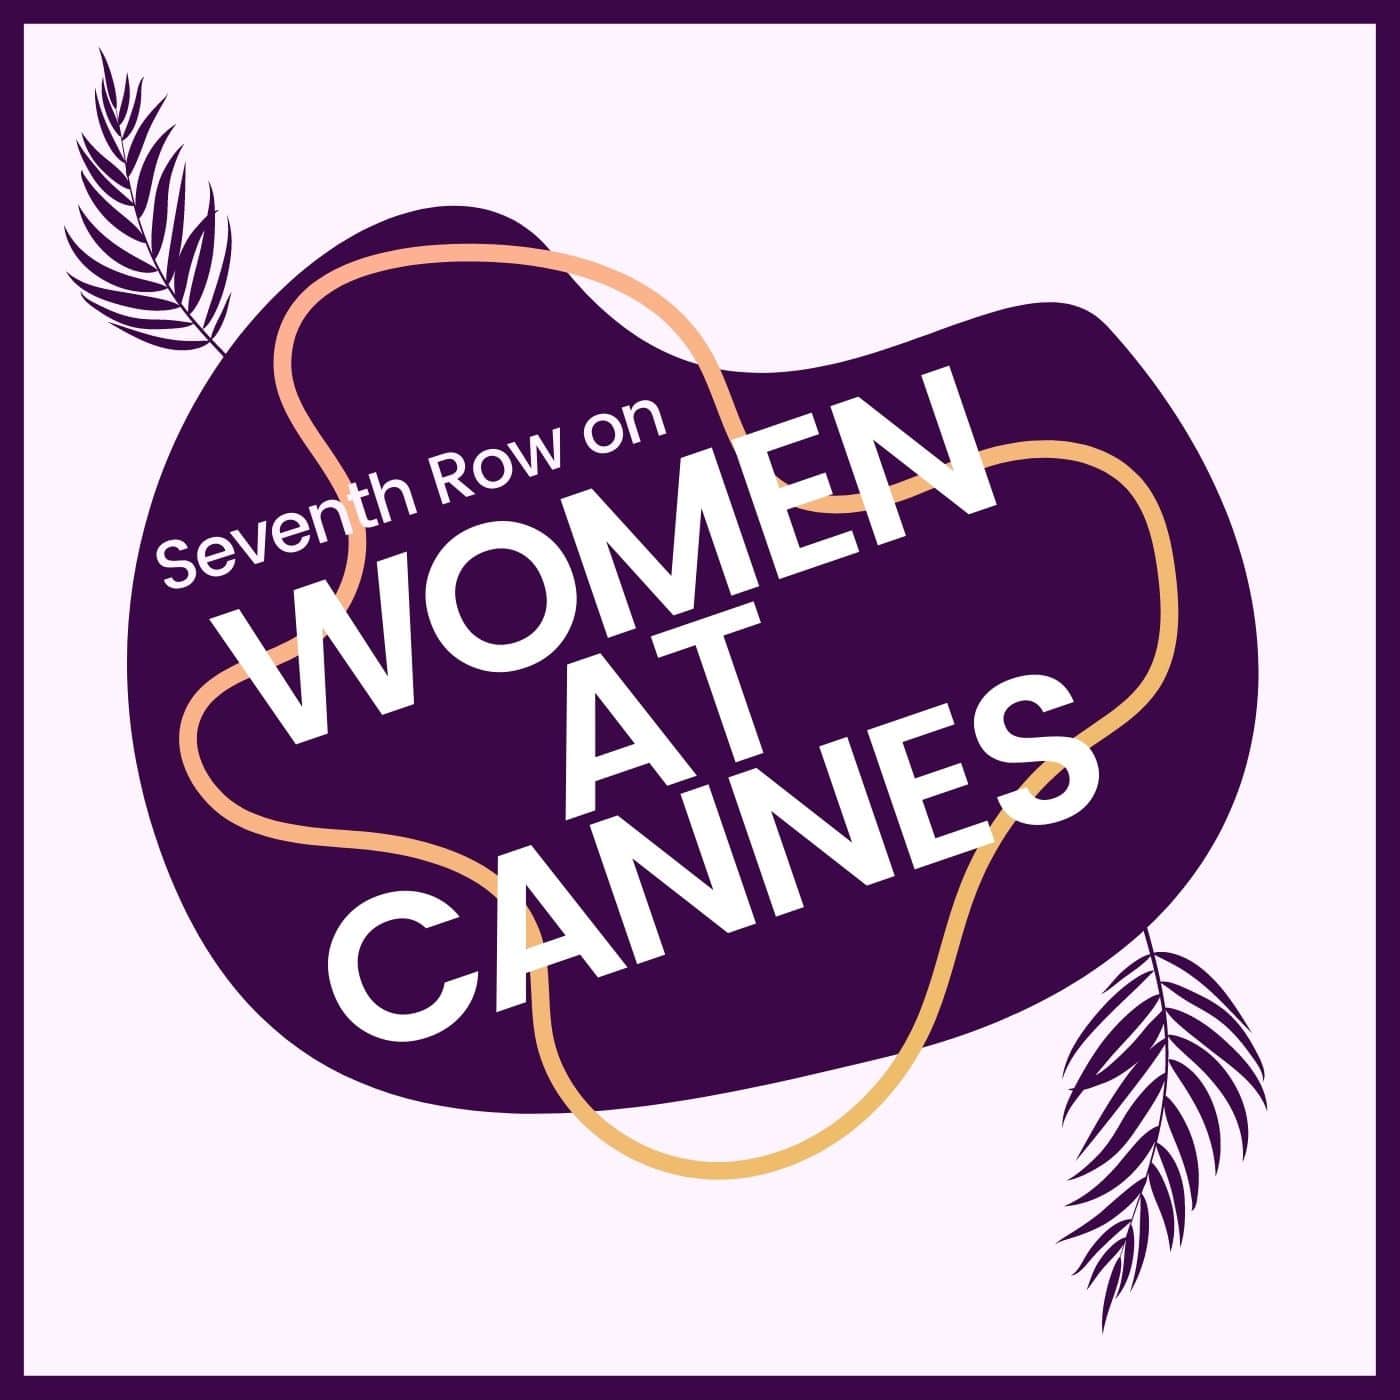 The Women at Cannes podcast seasons logo, a podcast season exploring Women directors at Cannes, like Erige Sehiri and her new film Under the Fig Trees